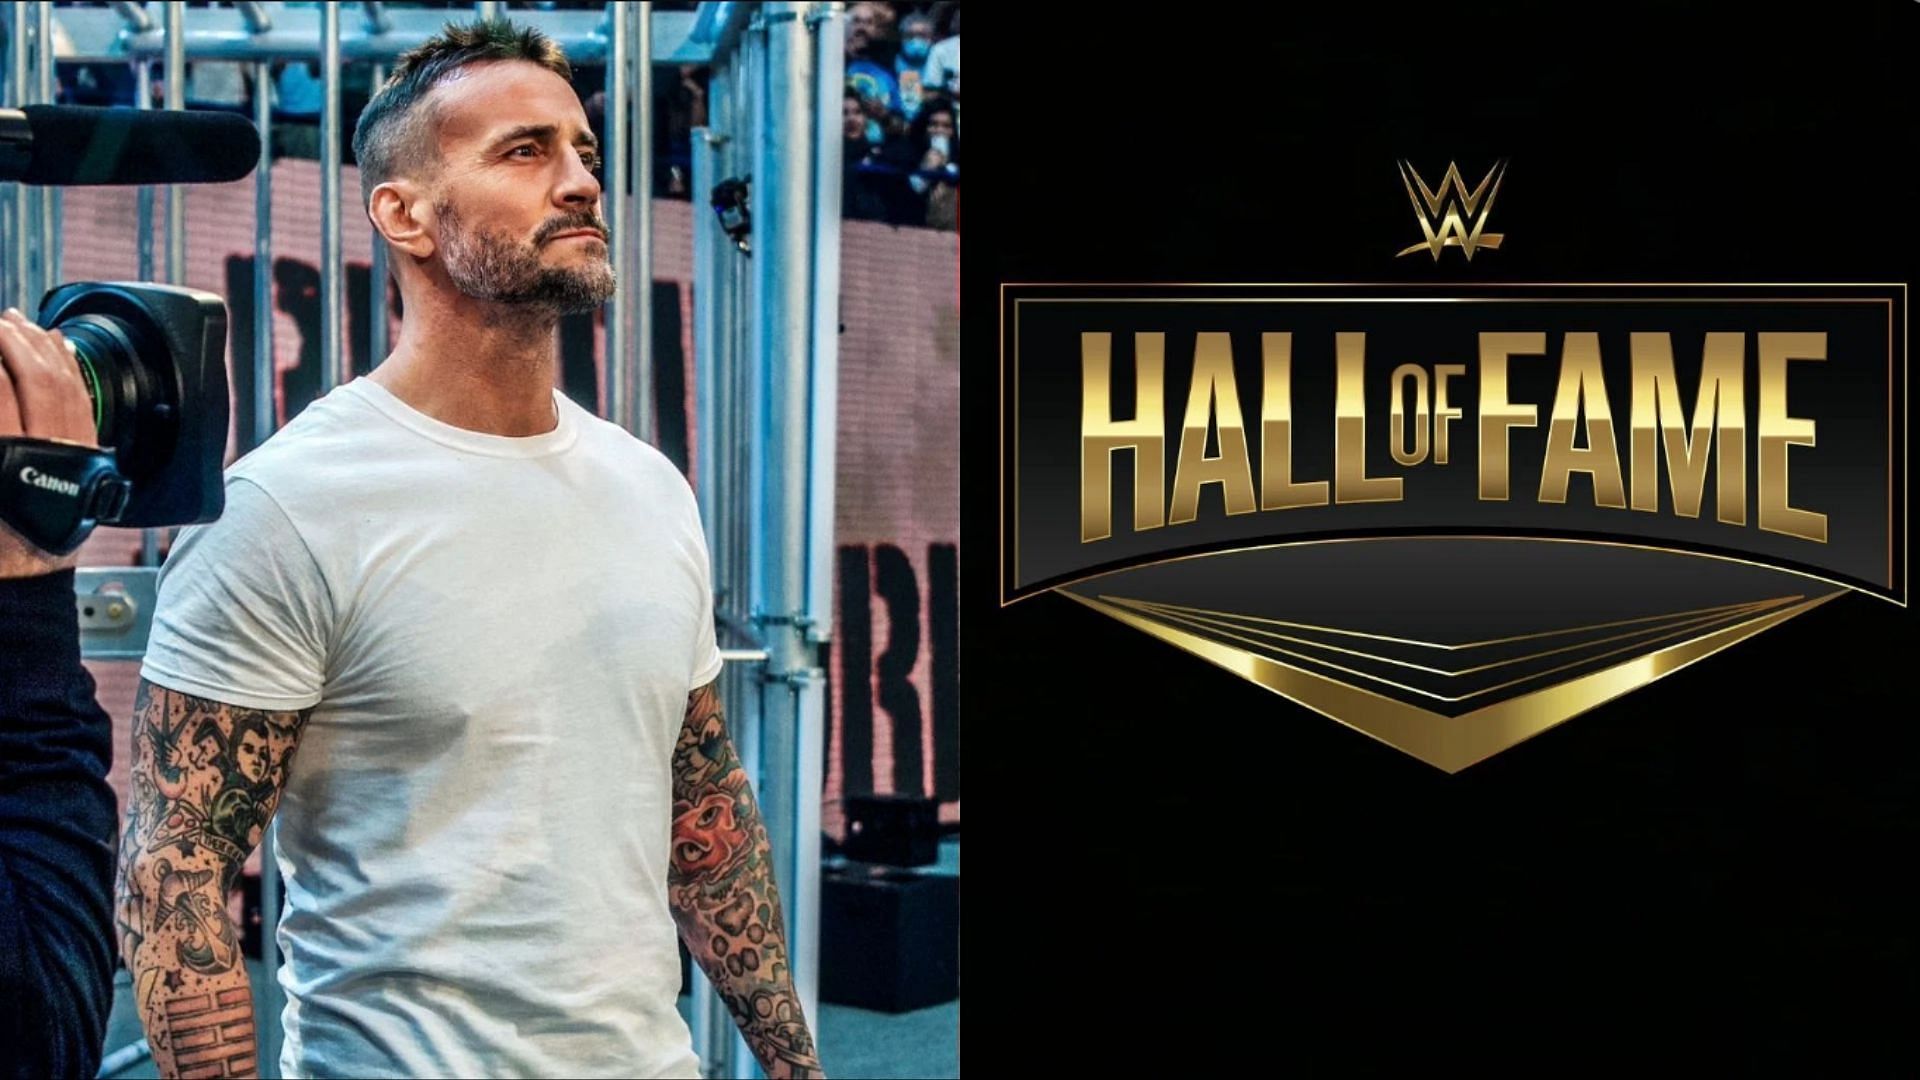 CM Punk talks about his match with two Hall of Famers